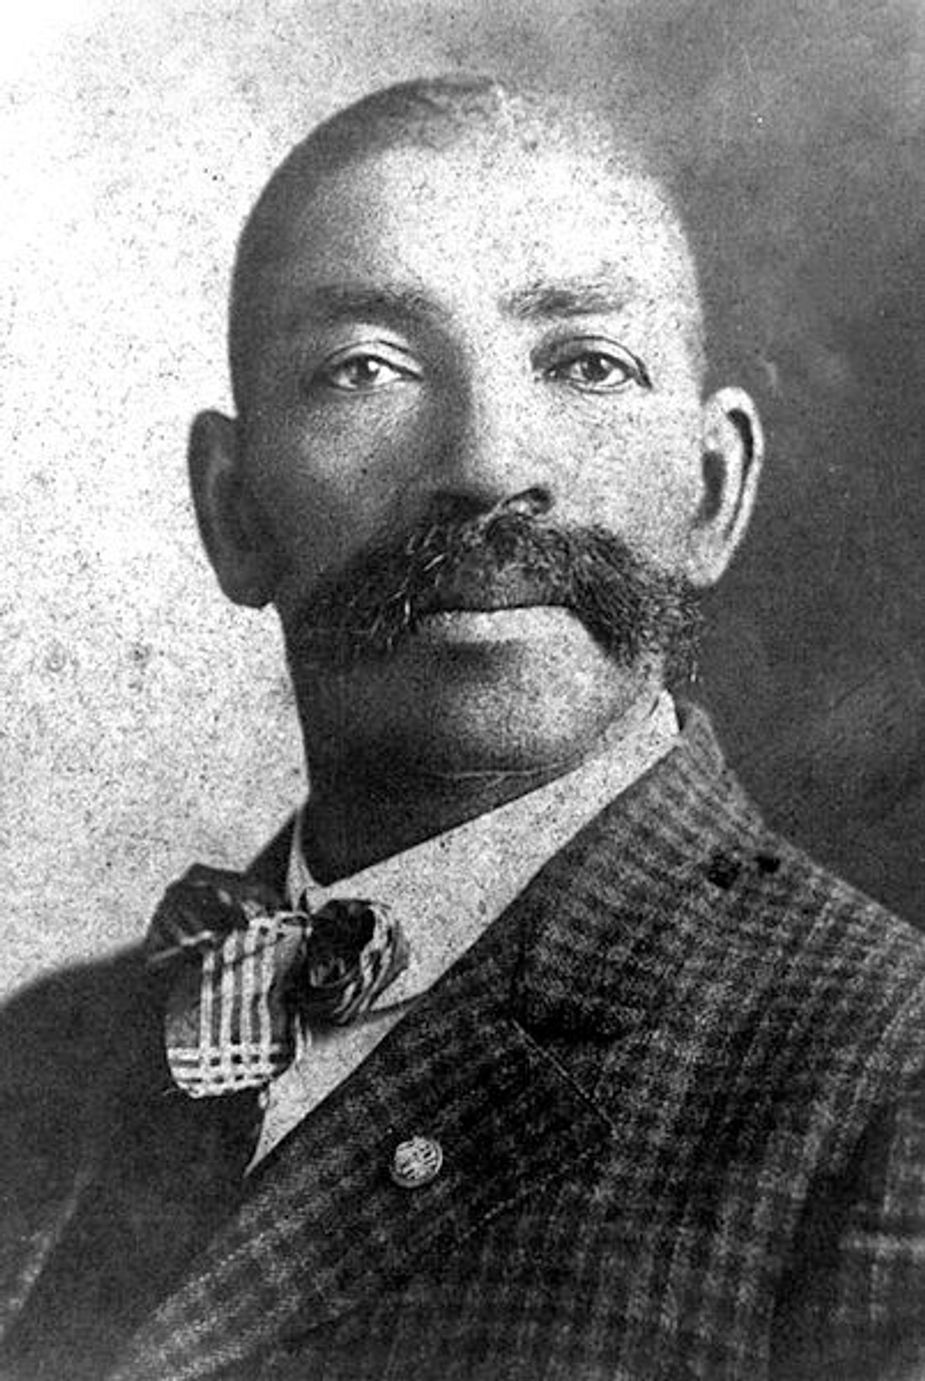 Walk in the footsteps of famed lawman Bass Reeves in Muskogee. Photo courtesy The Western History Collections at the University of Oklahoma Library